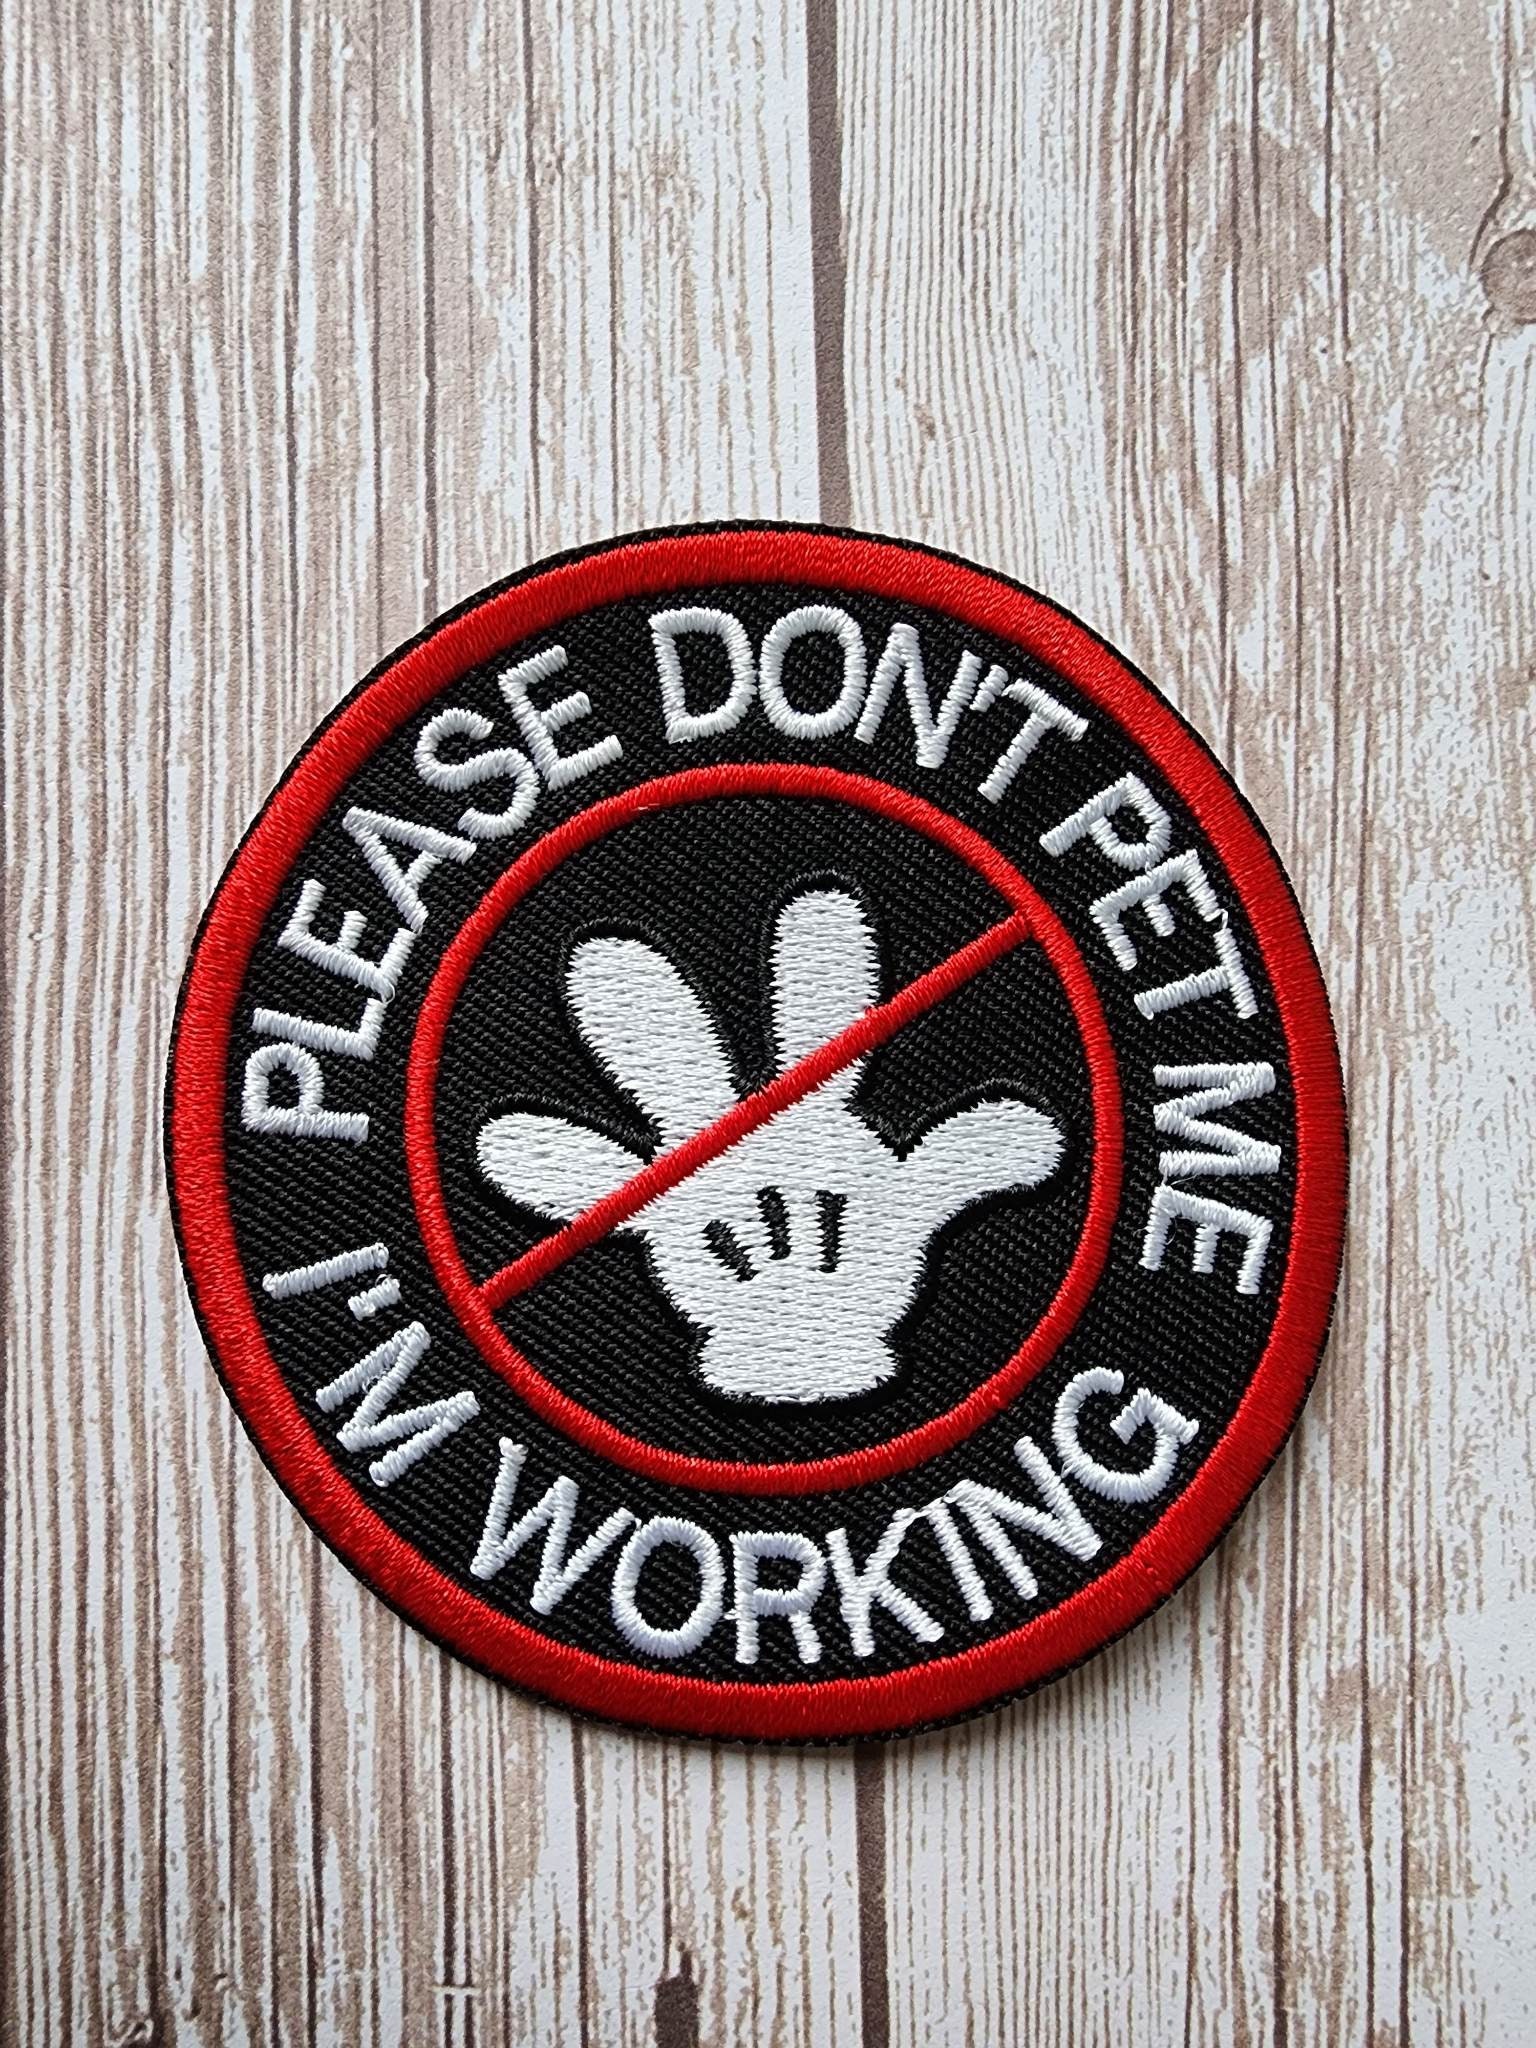 Magical Mickey Glove Hand - Do Not Pet ~ Working/Service Dog Patch